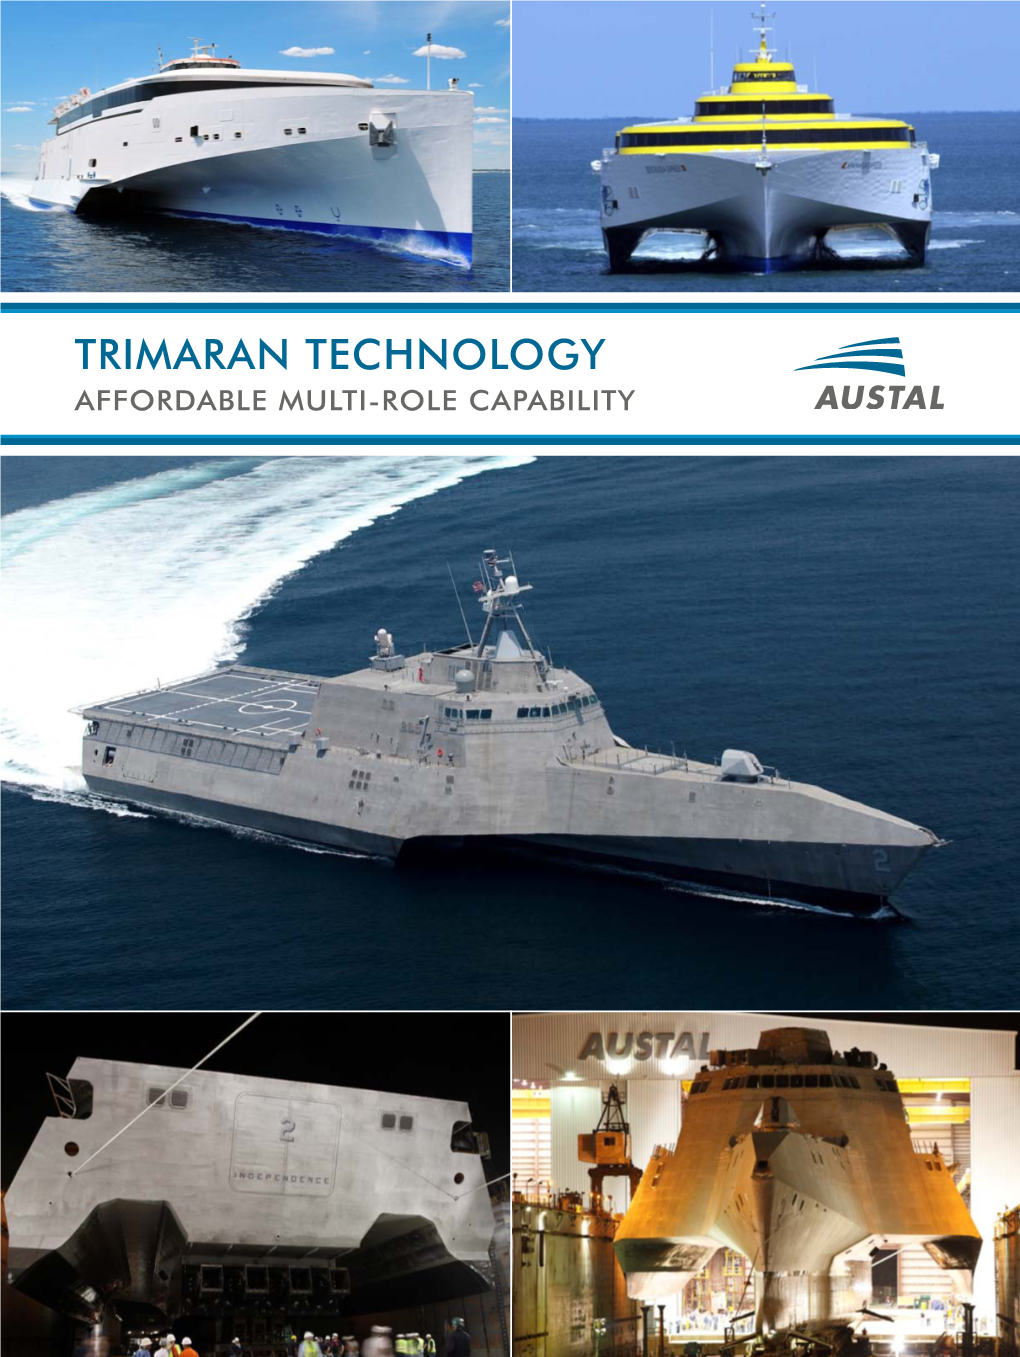 TRIMARAN TECHNOLOGY . AFFORDABLE MULTI-ROLE CAPABILITY Austal-2.Ps 18/3/11 12:19 Pm Page 2